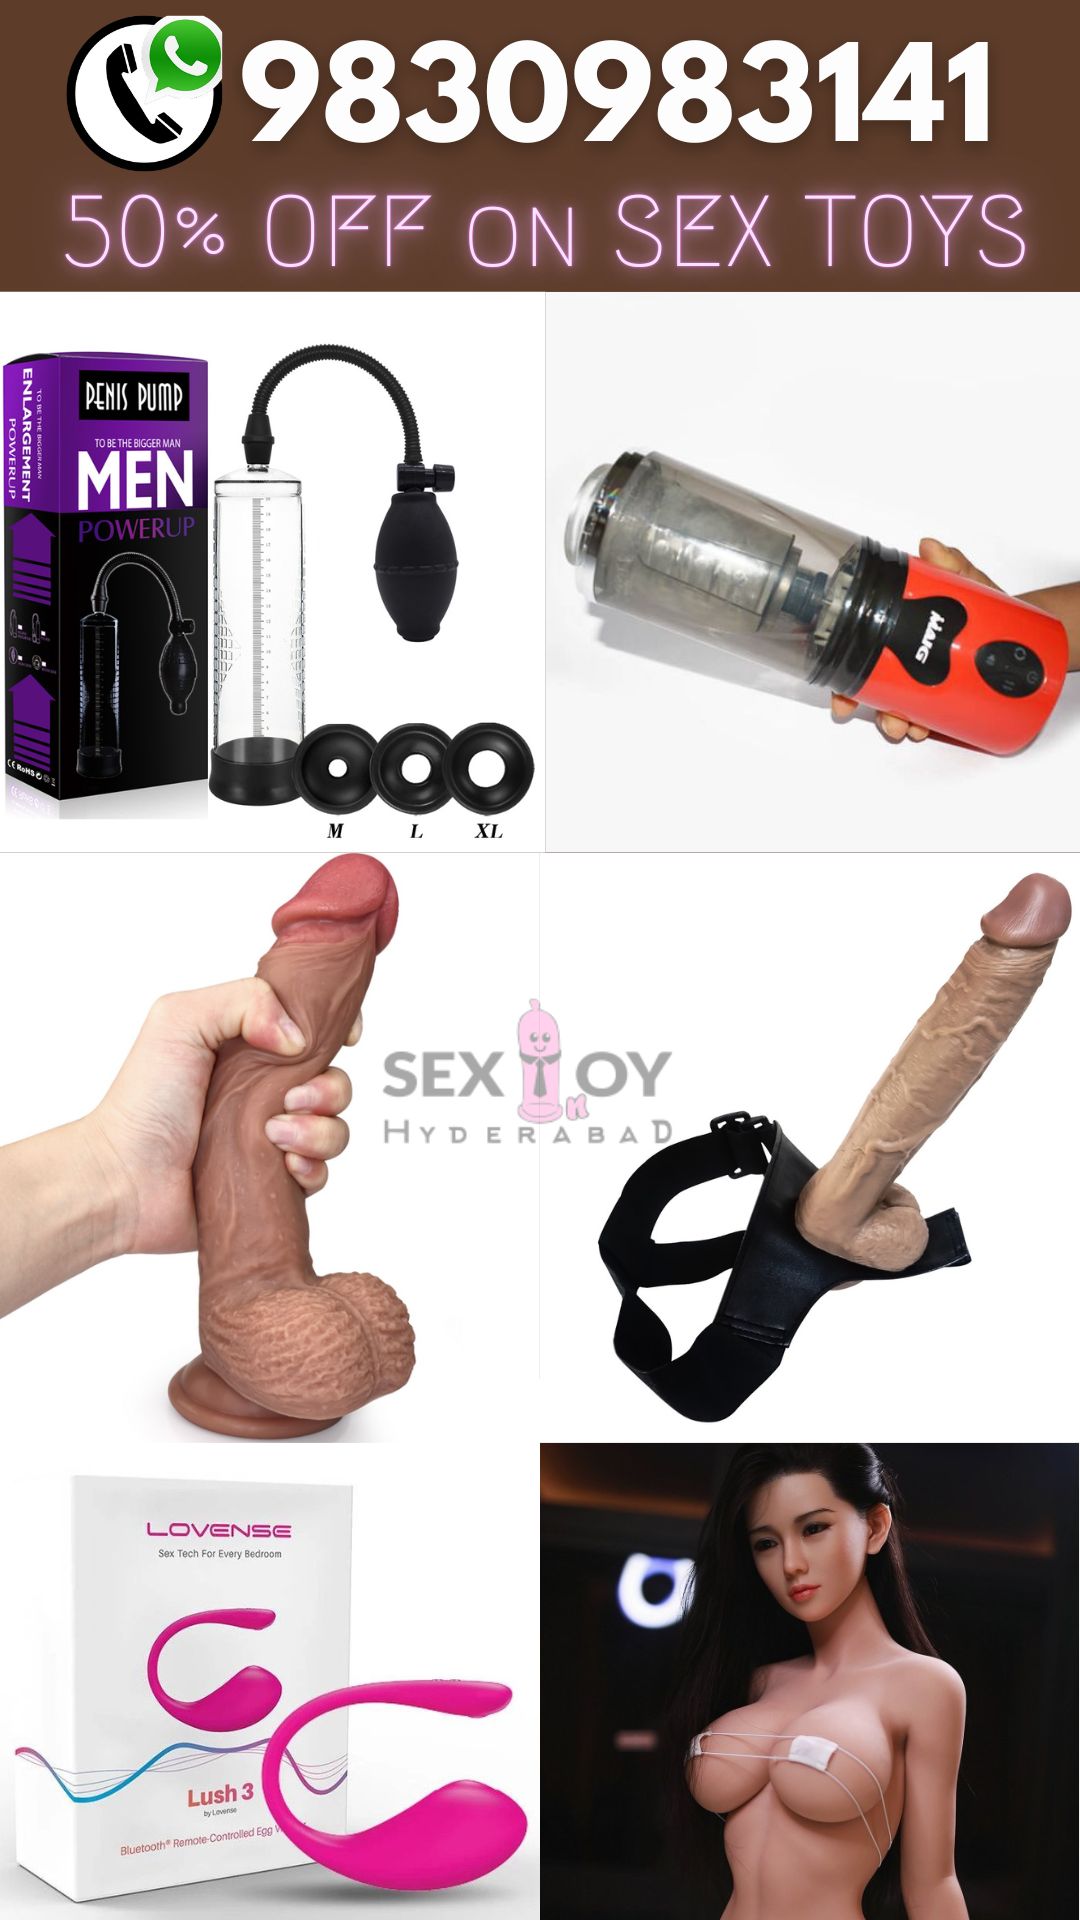 Monday Magic Offers On Sex Toys (All India Free Shipping)-Call/WhatsAp,Jalandhar,Others,Services,77traders